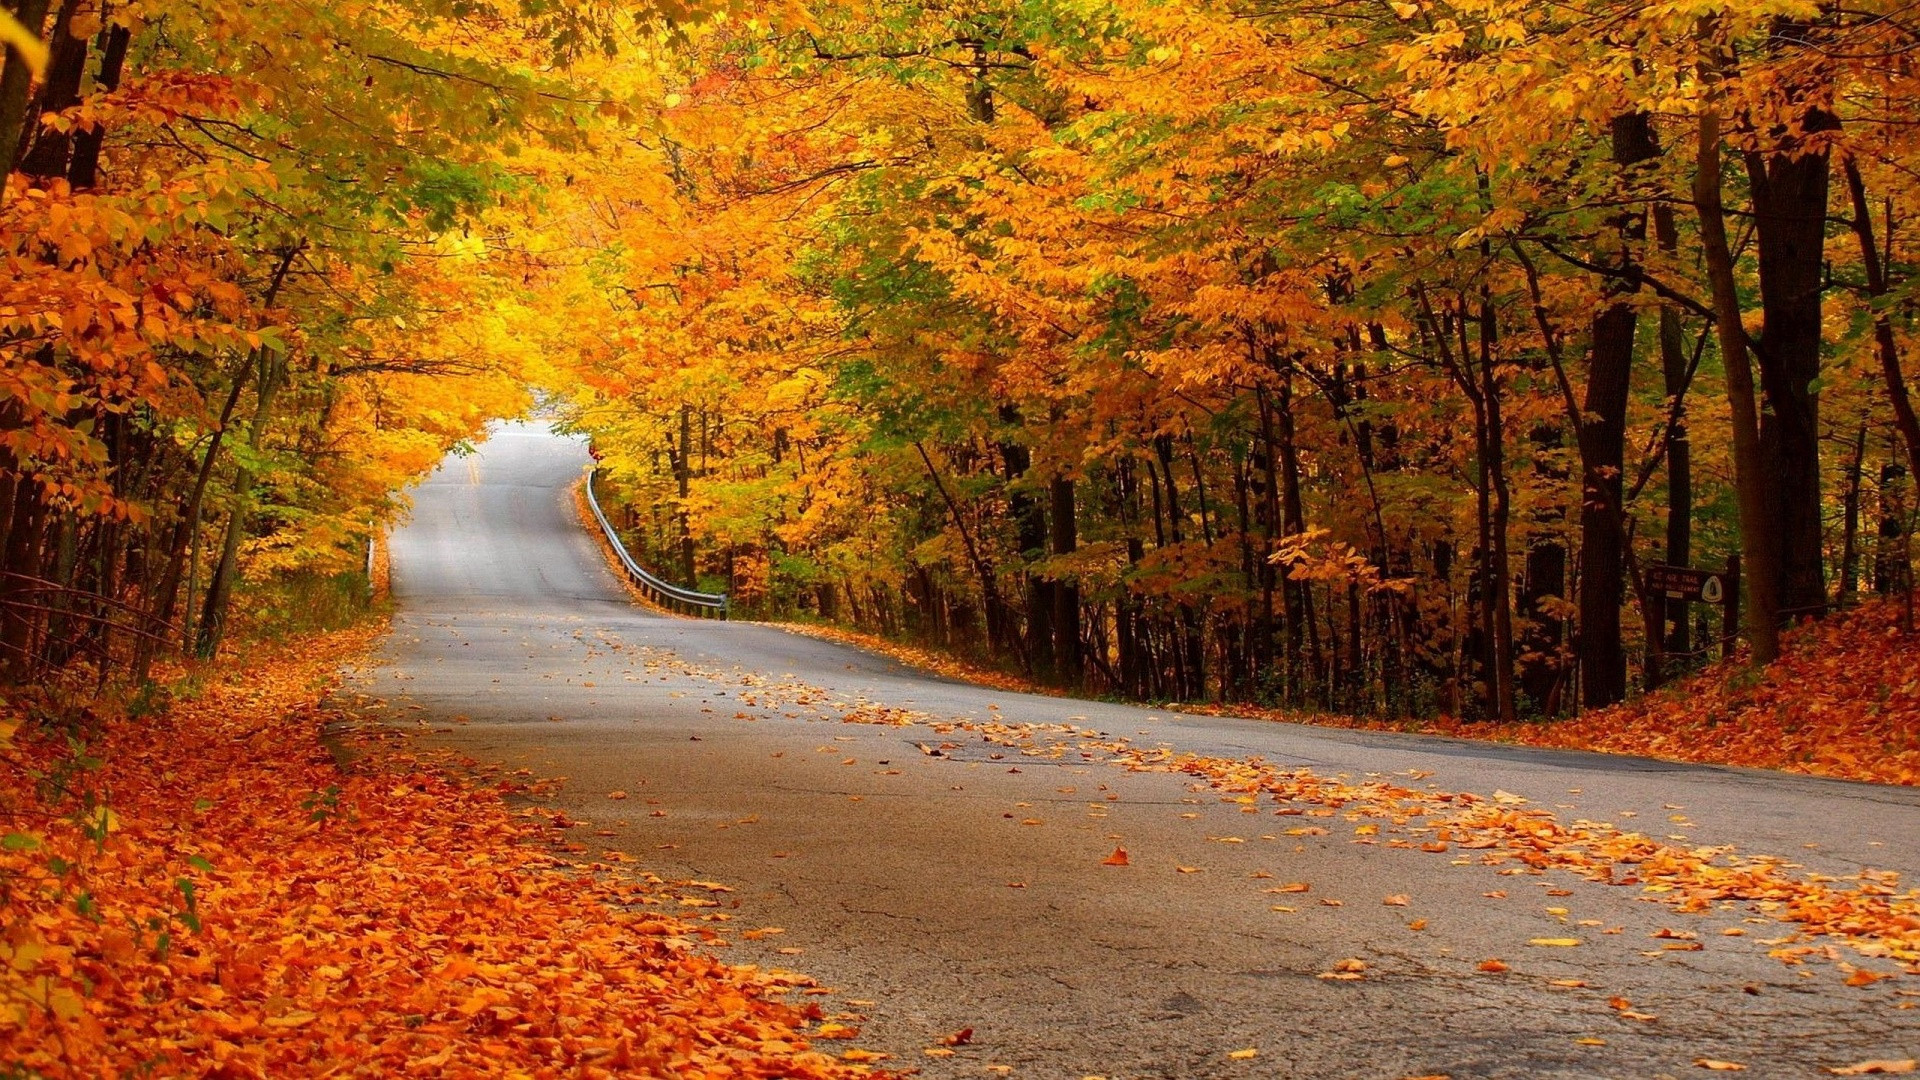 Hd Wallpaper For Pc-8 - Yellow Leaves With Road , HD Wallpaper & Backgrounds